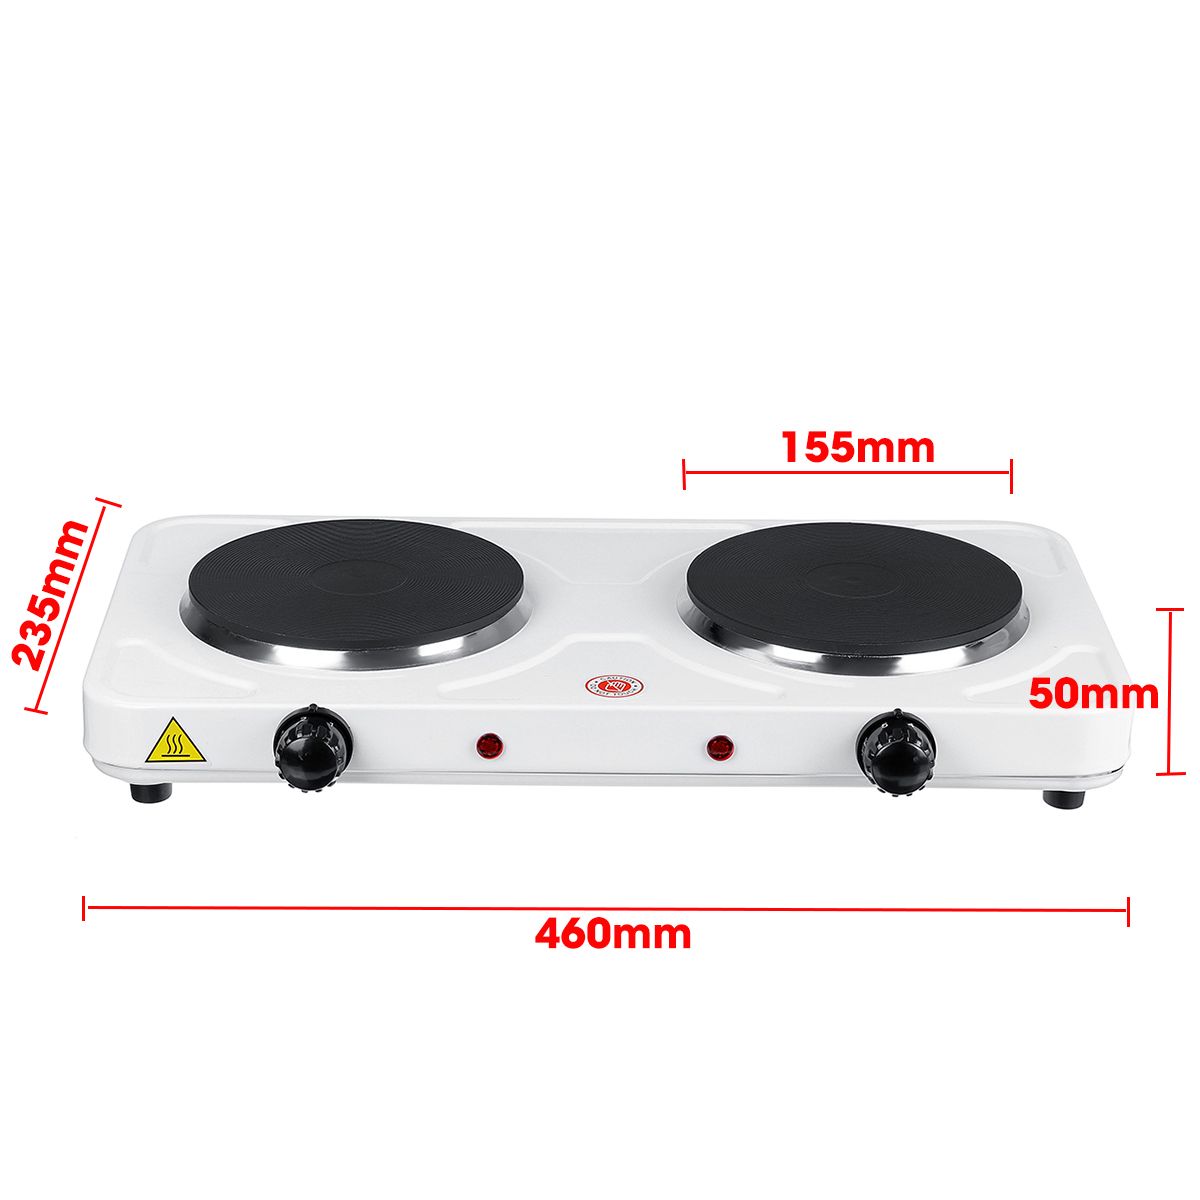 110V-2000W-Portable-Double-Electric-Stove-Burner-Hot-Plate-Cooking-Heater-1730241